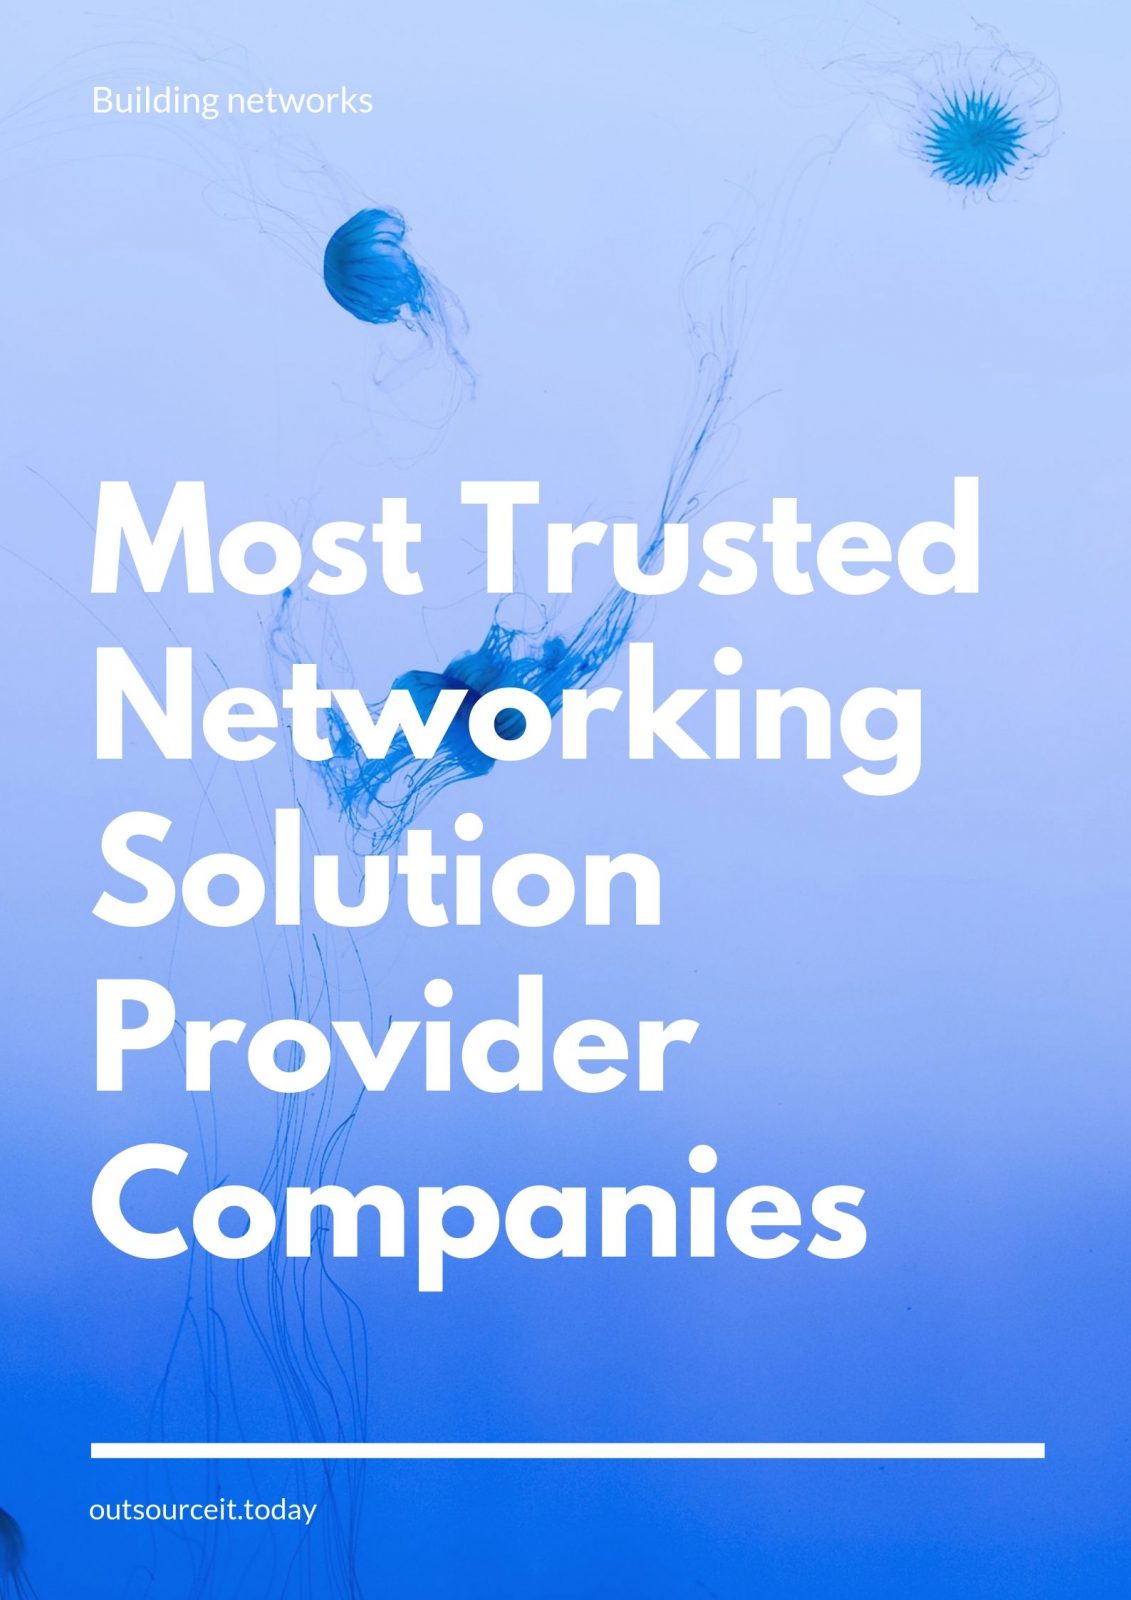 The 11 Most Trusted Networking Solution Provider Companies